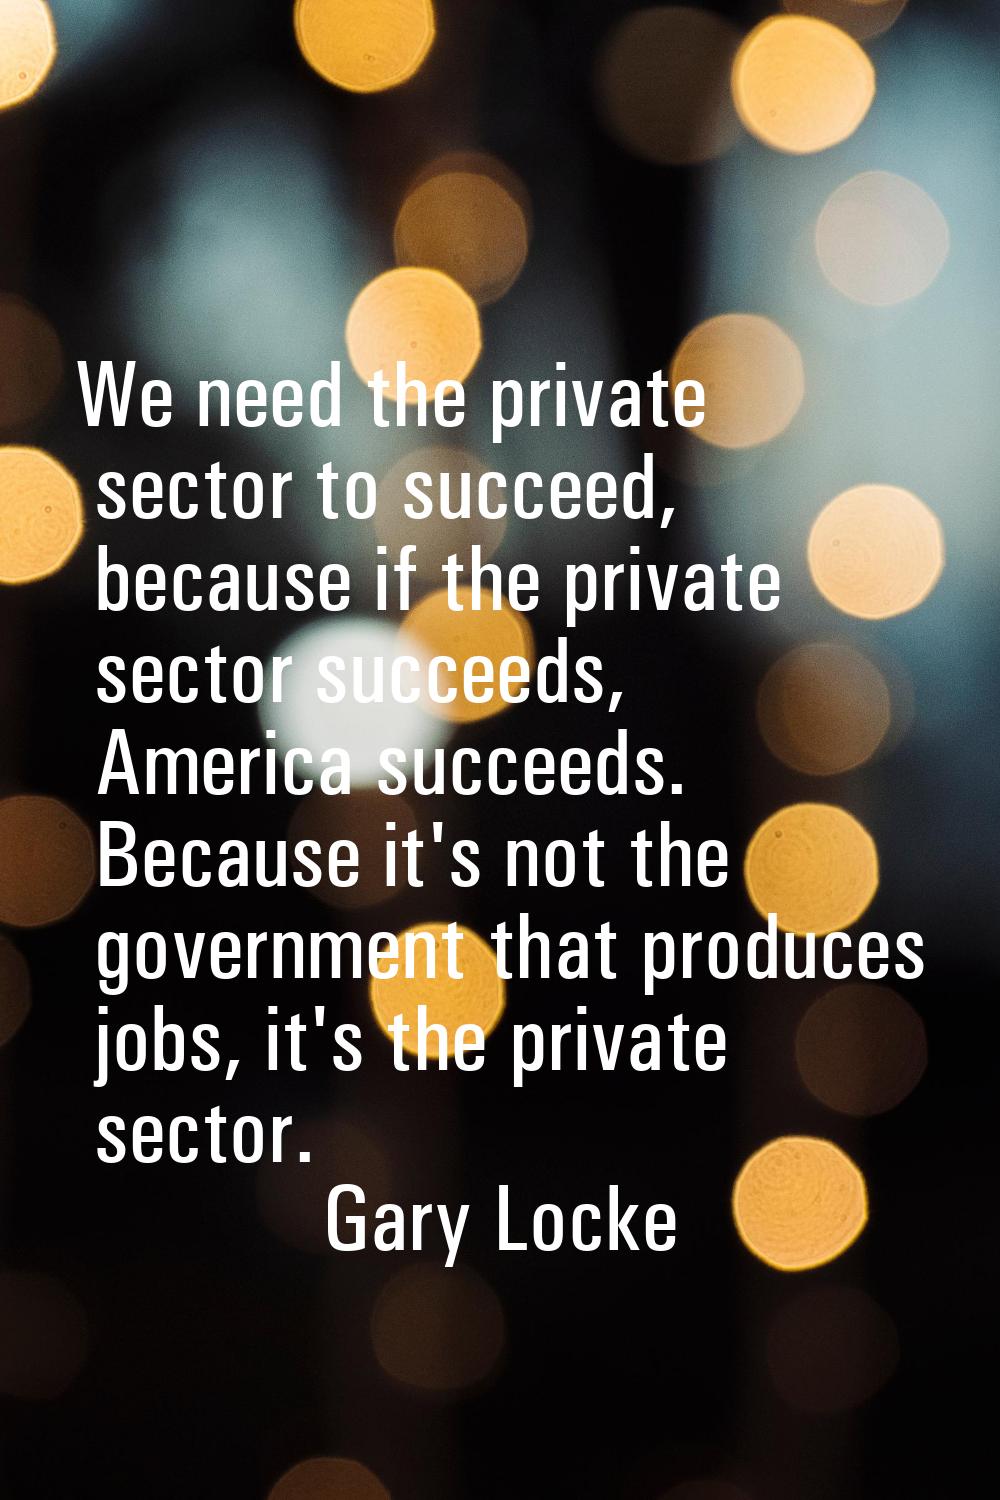 We need the private sector to succeed, because if the private sector succeeds, America succeeds. Be